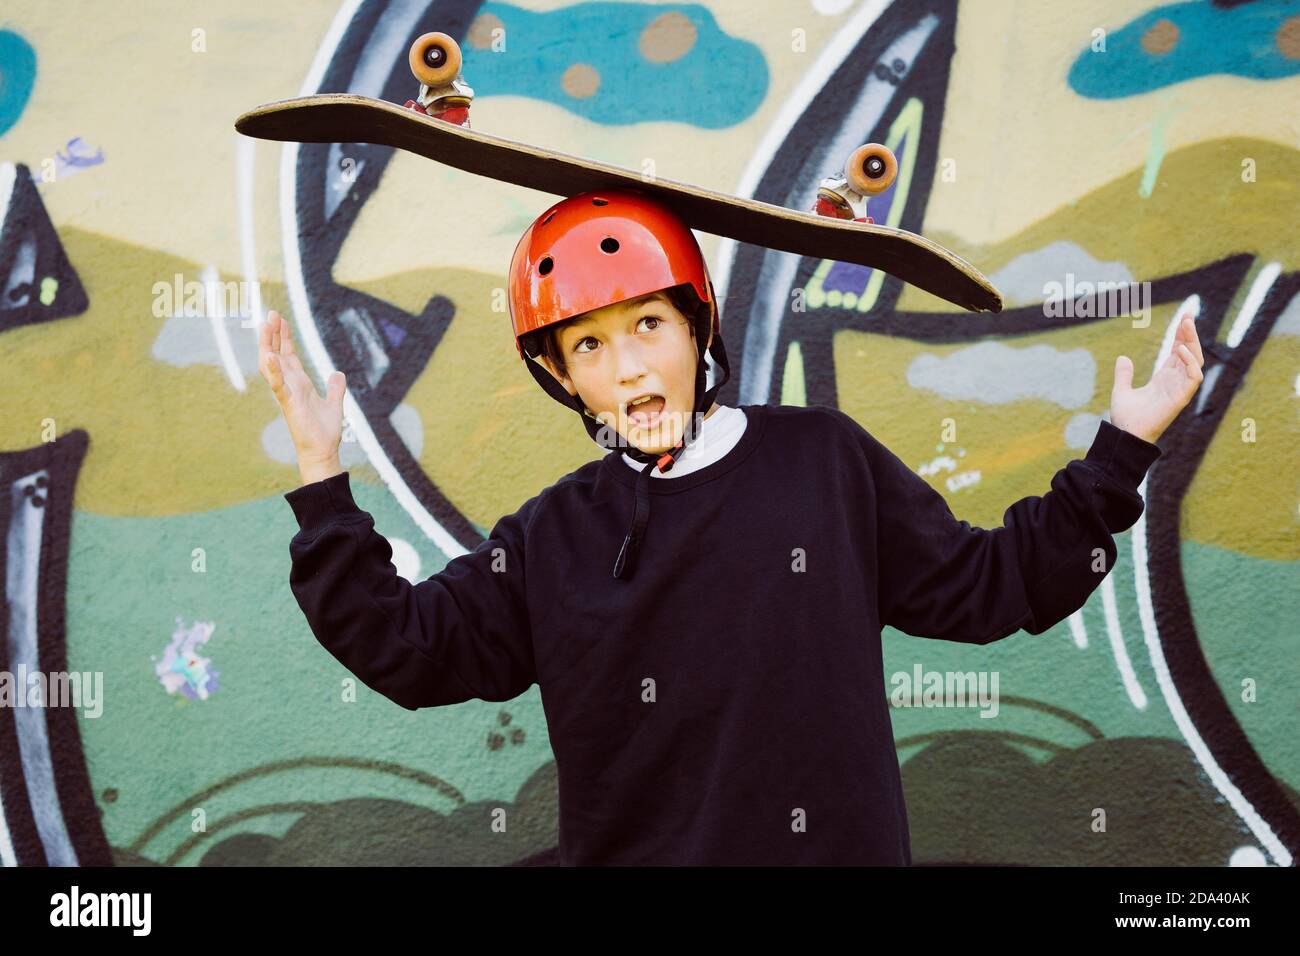 Portrait of a young skater boy wearing  red helmet and playing with an old skateboard, in front of a graffiti mural Stock Photo